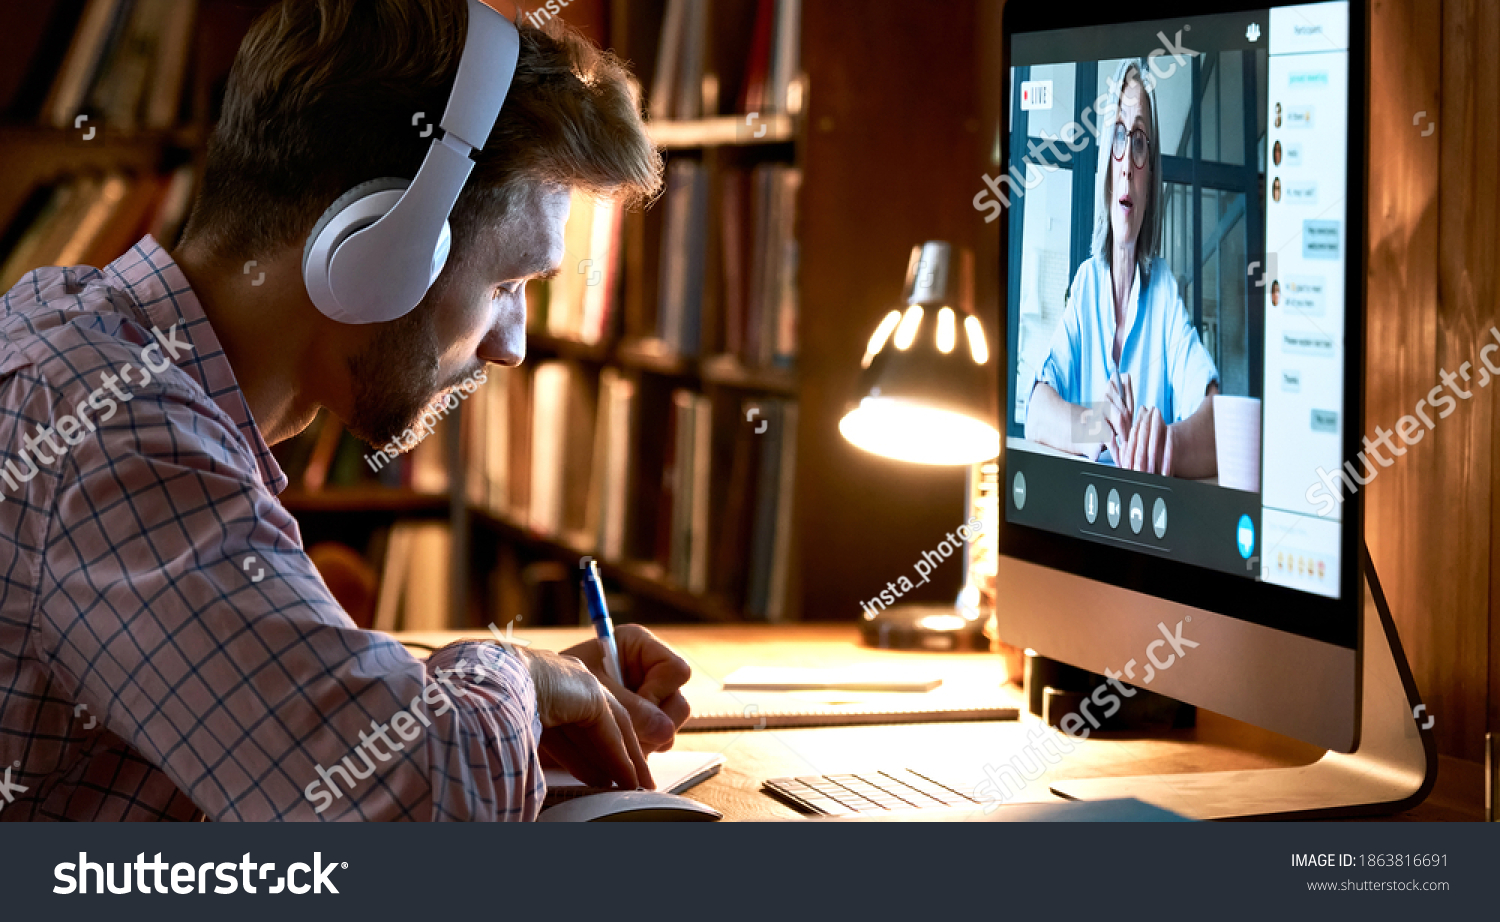 Male student wearing headphones conference video calling, watching webinar, online training class, virtual chat meeting with remote teacher or coach distance learning using computer, taking notes. #1863816691